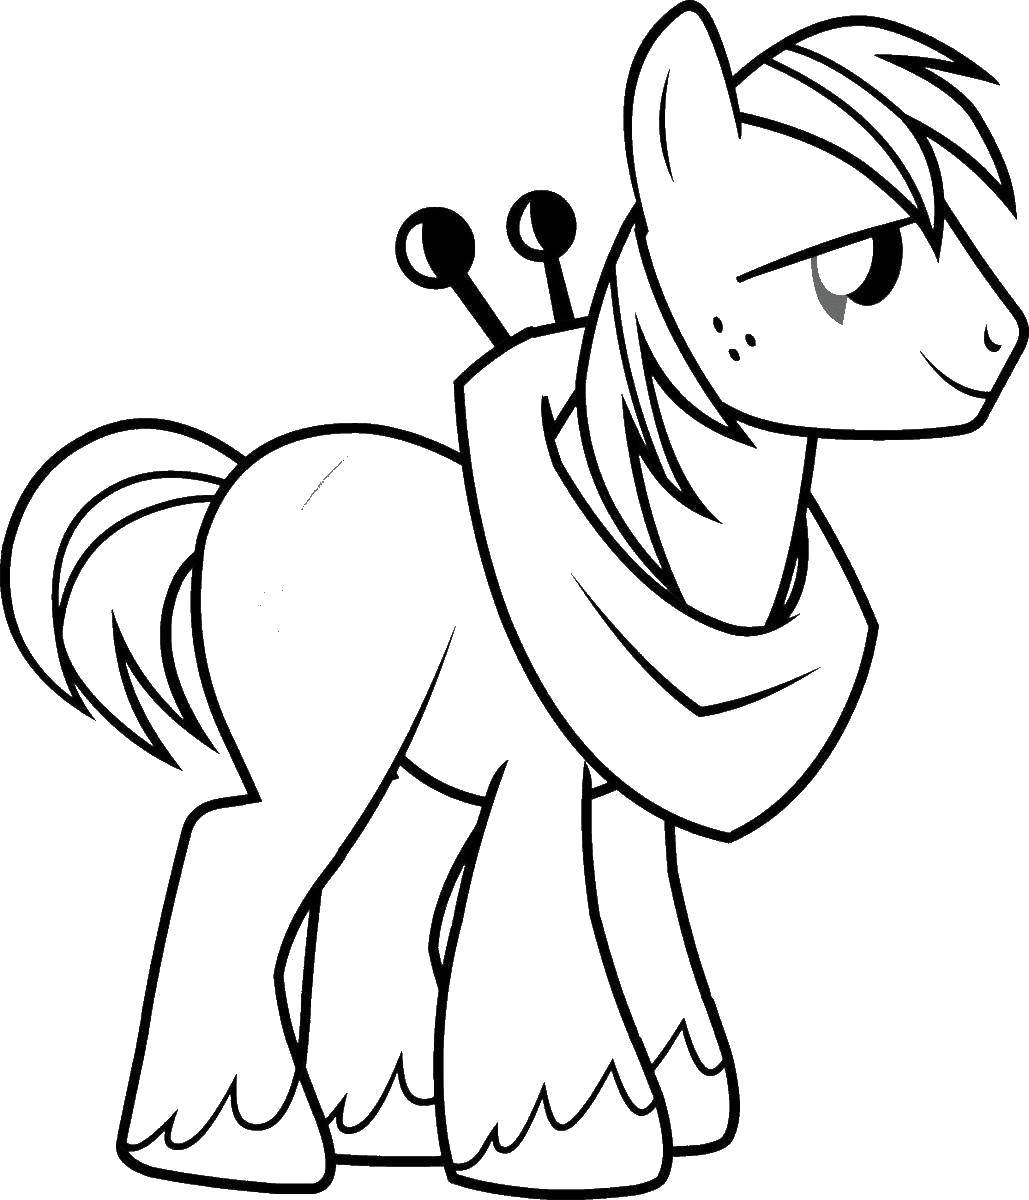 Coloring Horse. Category Ponies. Tags:  Pony, My little pony.